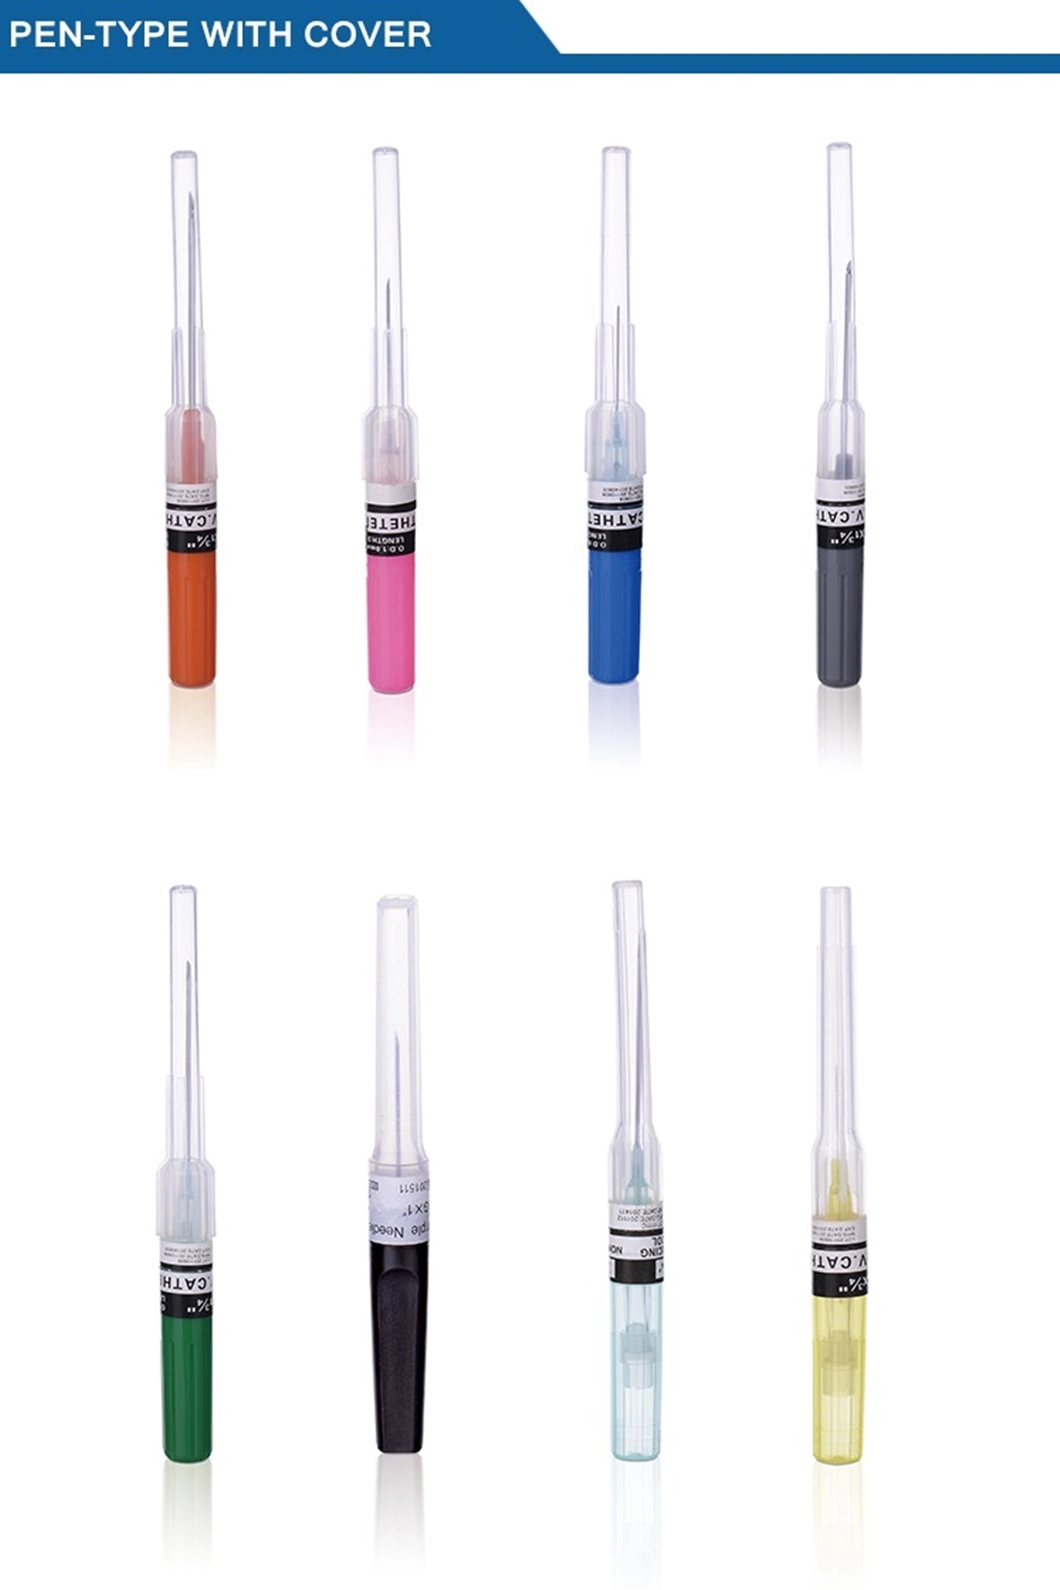 Medical Disposables Products Sterile IV Catheter Pen Type Intravenous Cannula